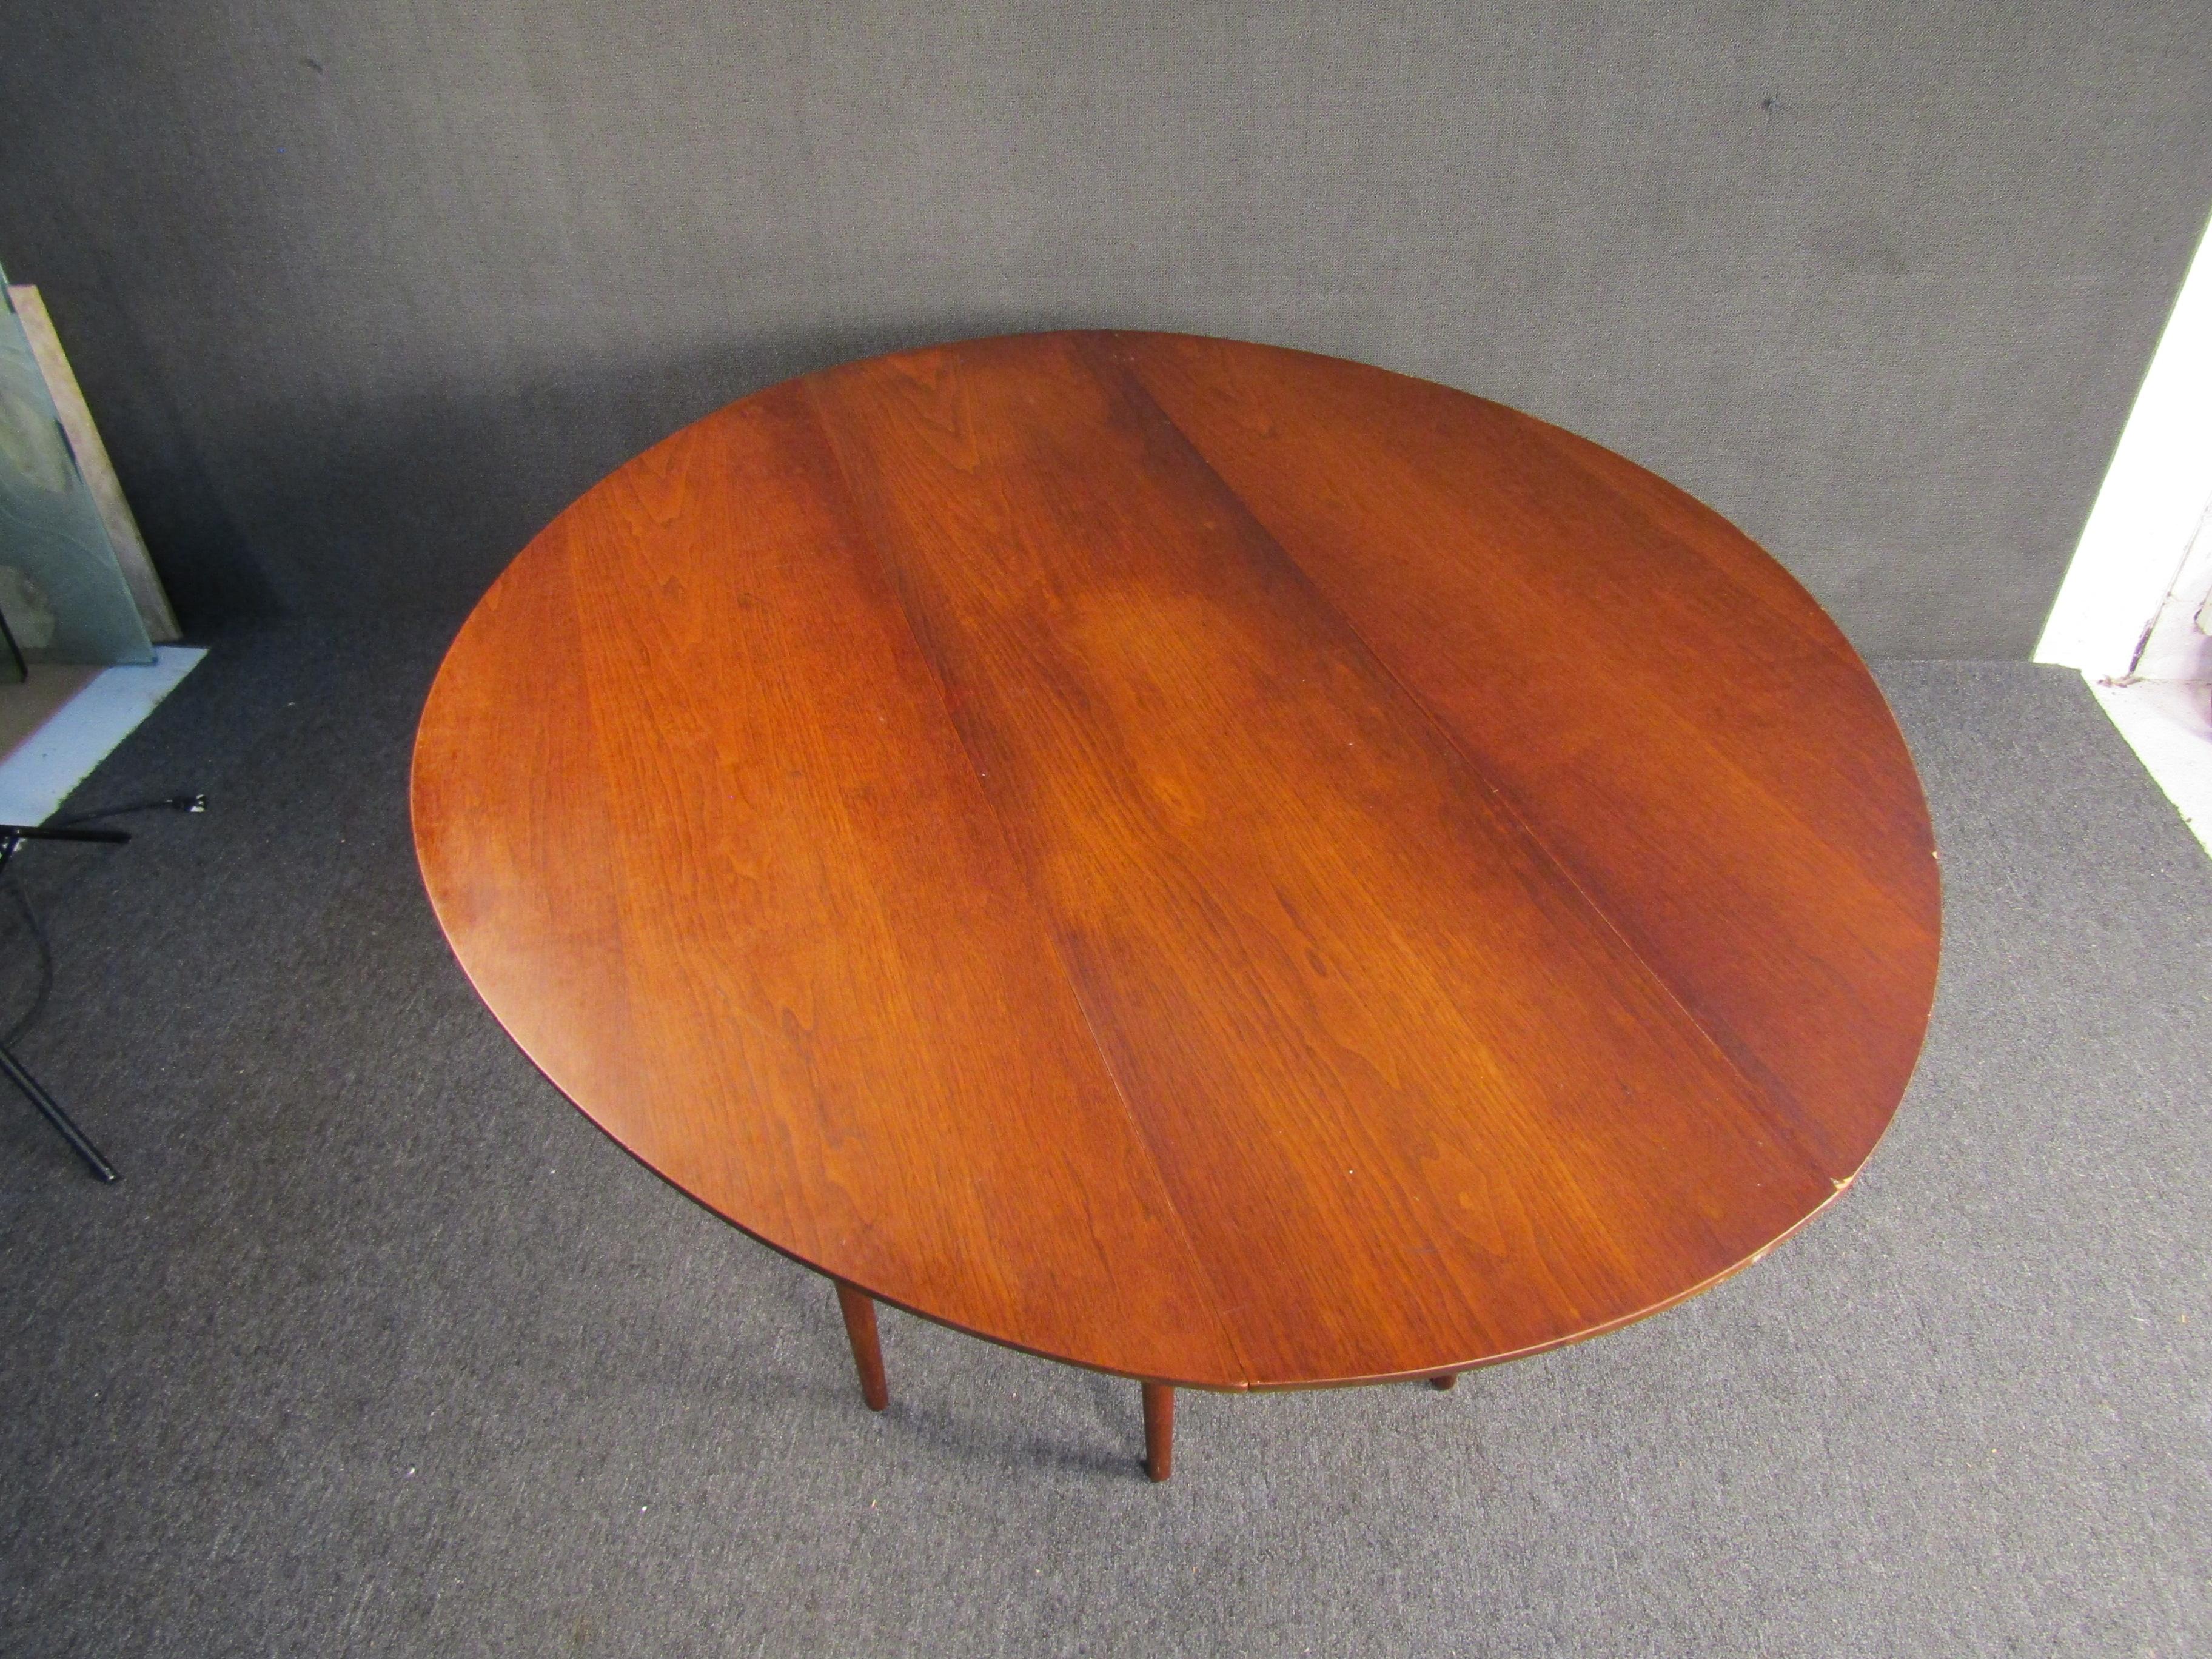 Beautiful walnut gateleg dining table by Heritage-Henredon, circa 1960s. Featuring tapered legs and two folding leaves which expand the table from 19.5